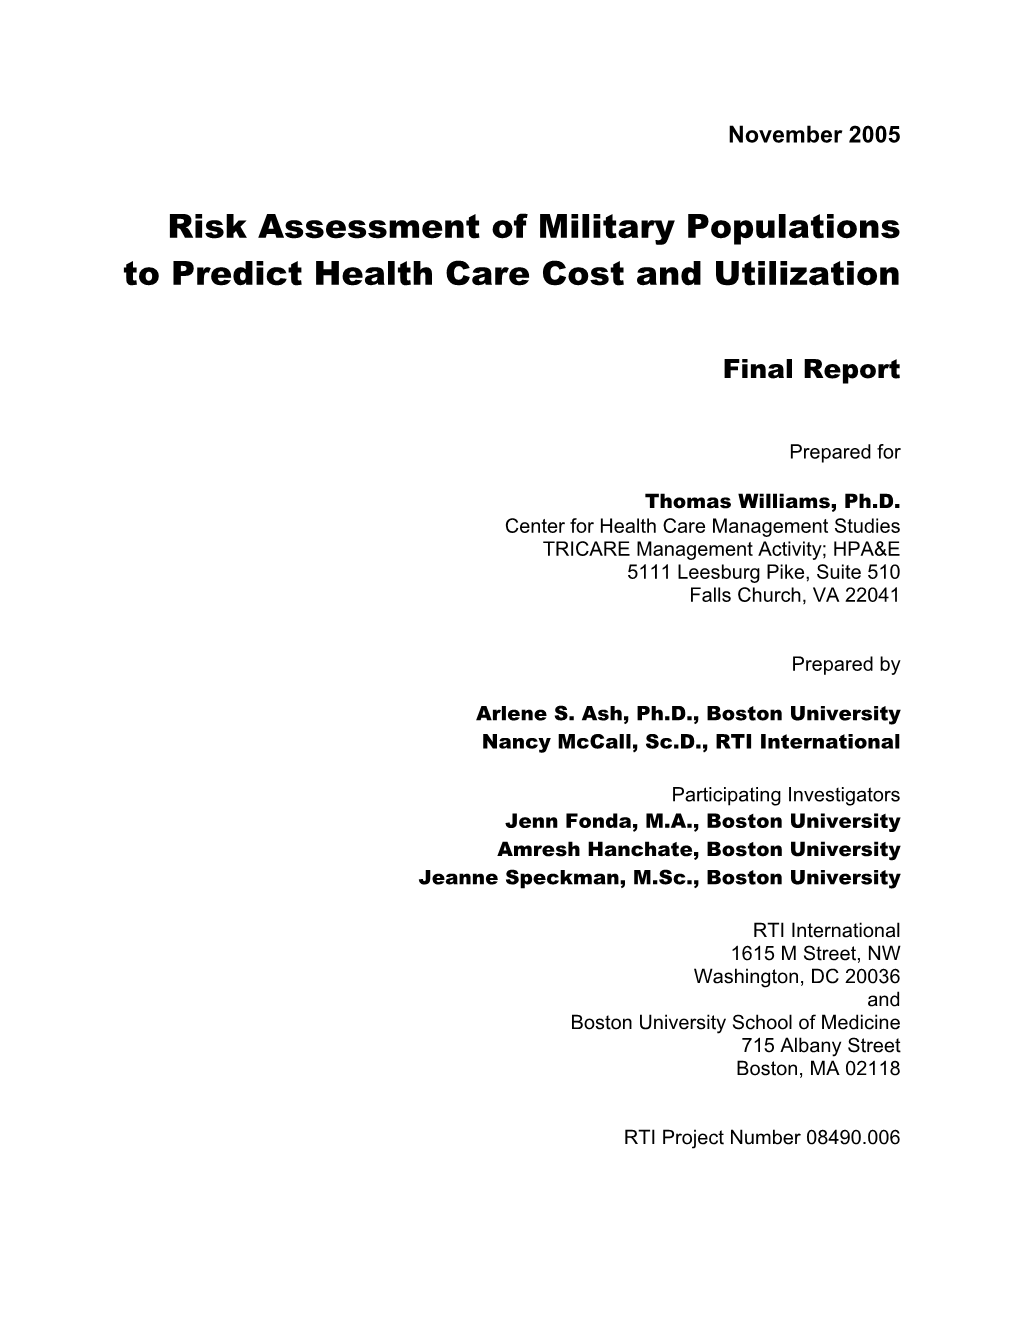 Risk Assessment of Military Populations to Predict Health Care Cost and Utilization